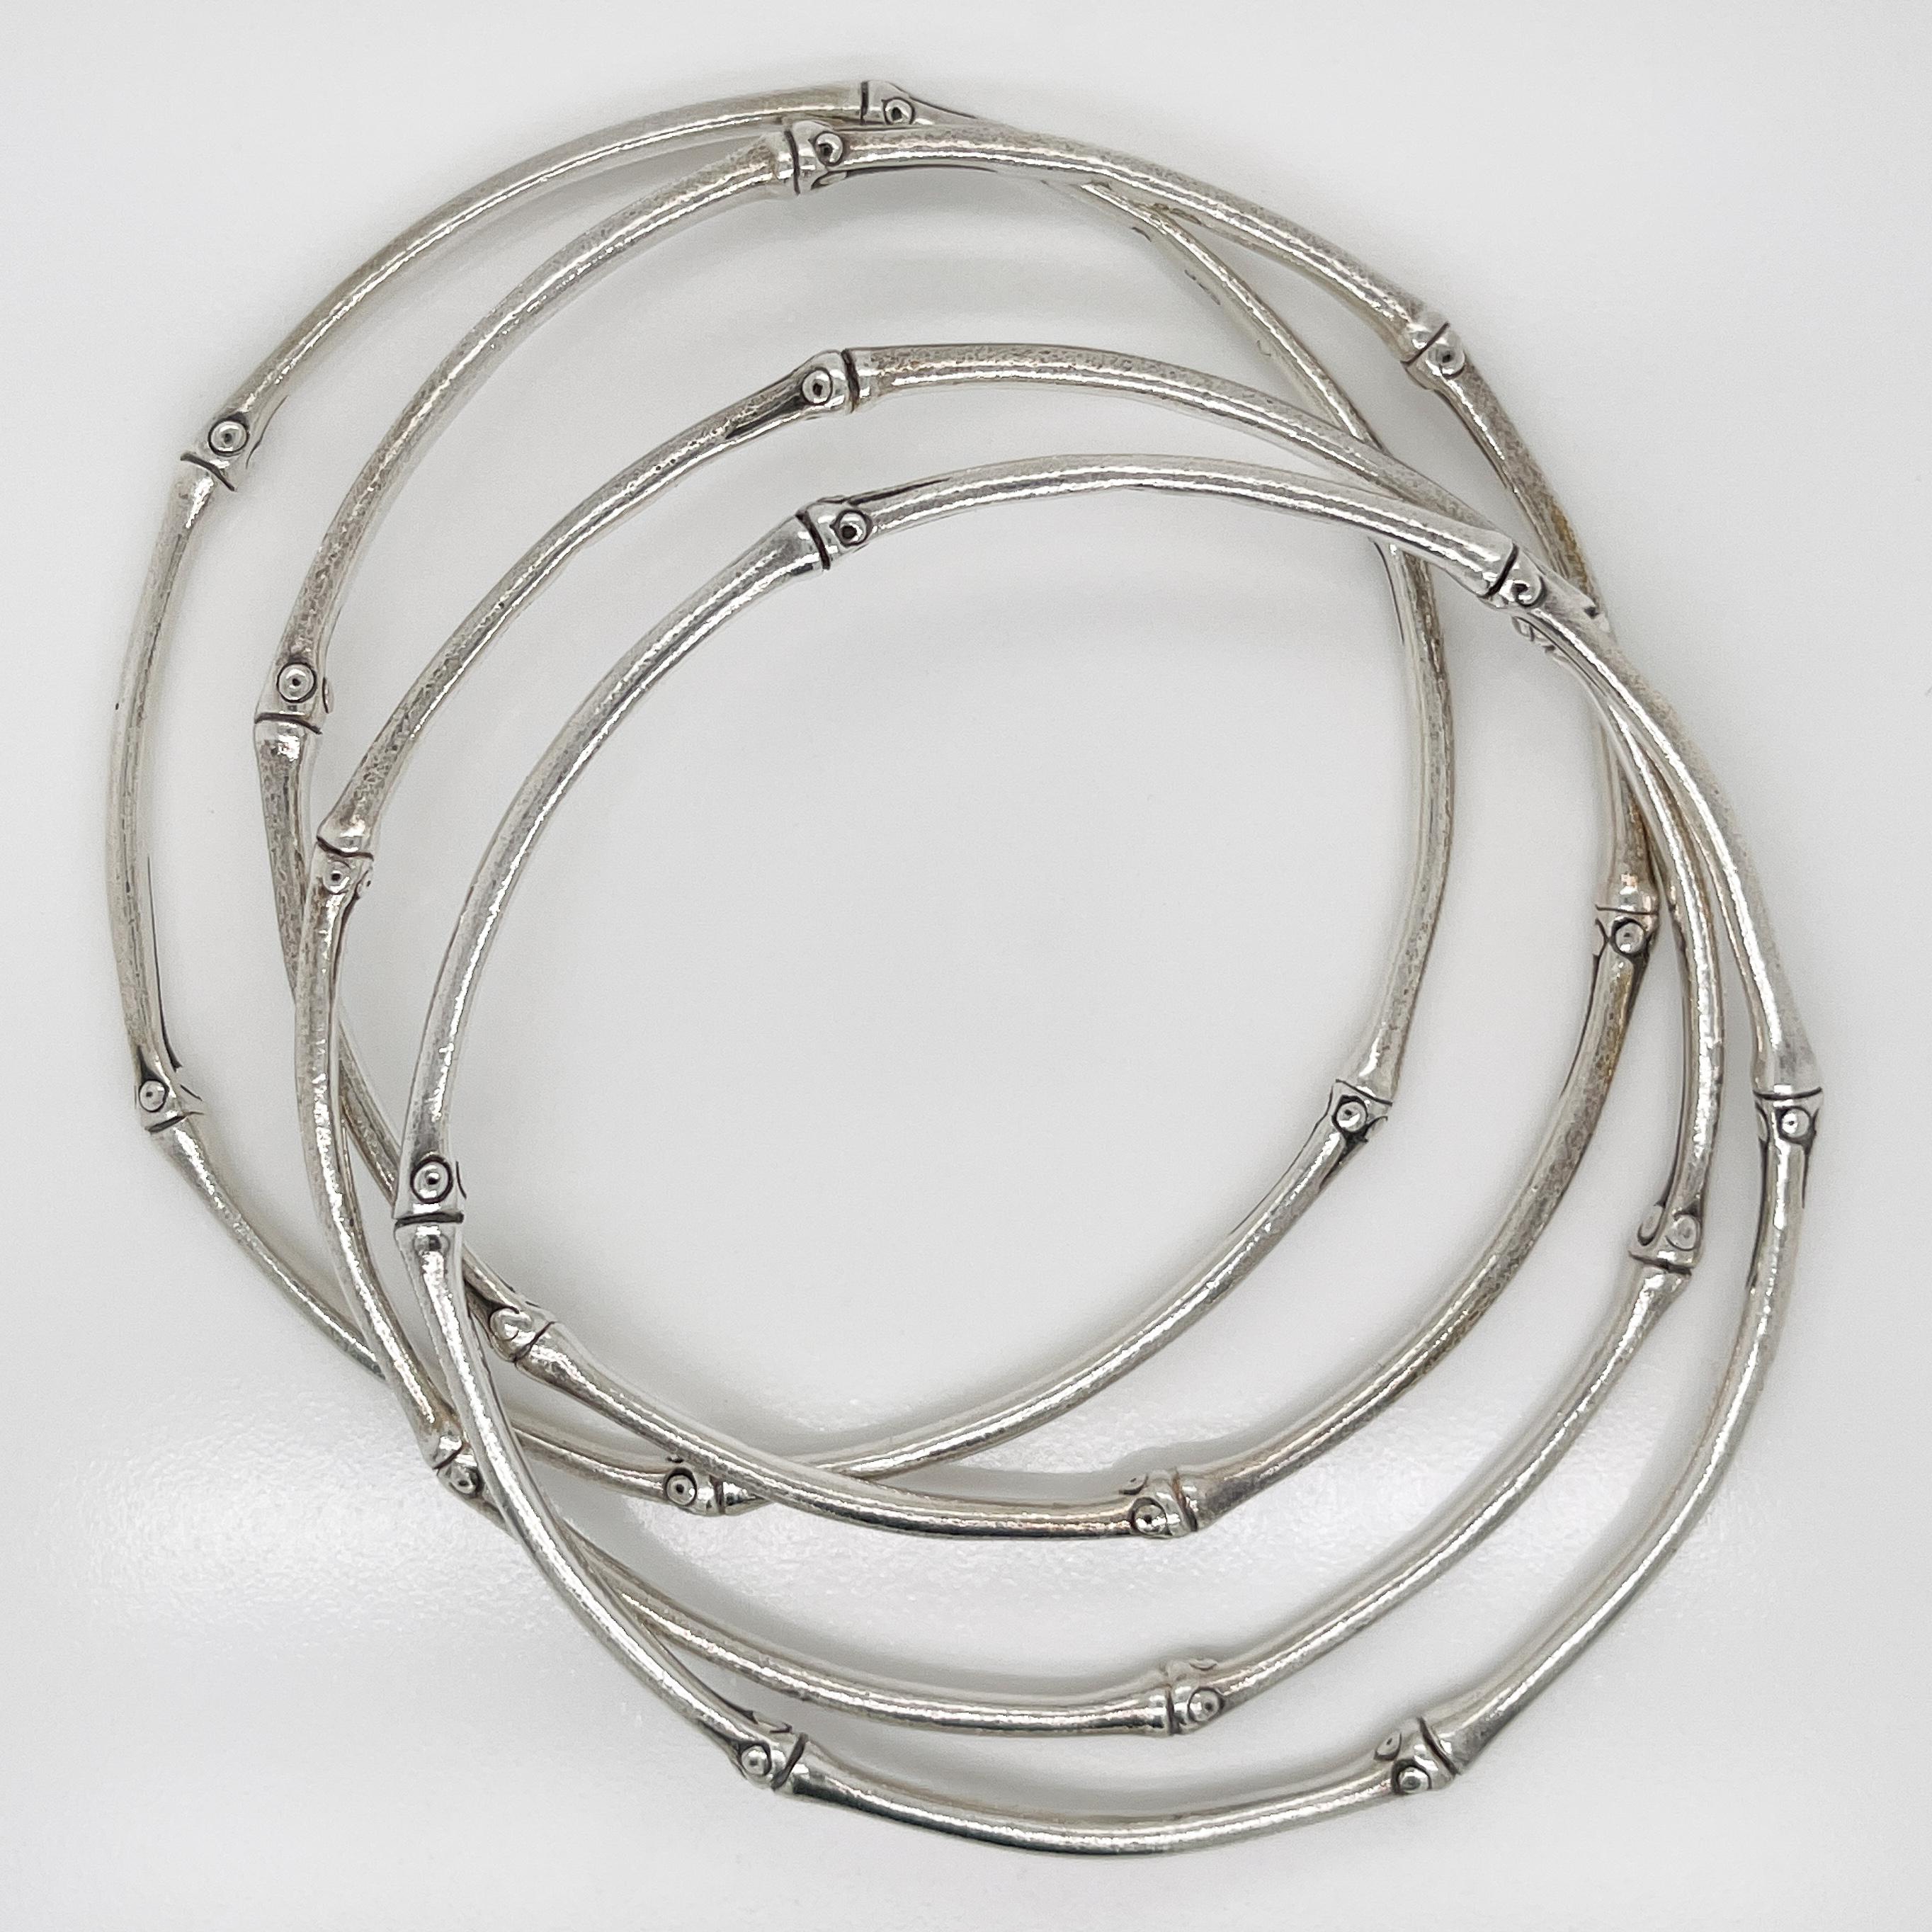 A fine 4-piece bangle bracelet set.

By John Hardy.

In sterling silver in the Nusa Penida Slim Bamboo design. 

Simply a wonderful group of bangle bracelets by John Hardy!

Date:
21st Century

Overall Condition:
It is in overall good, as-pictured,